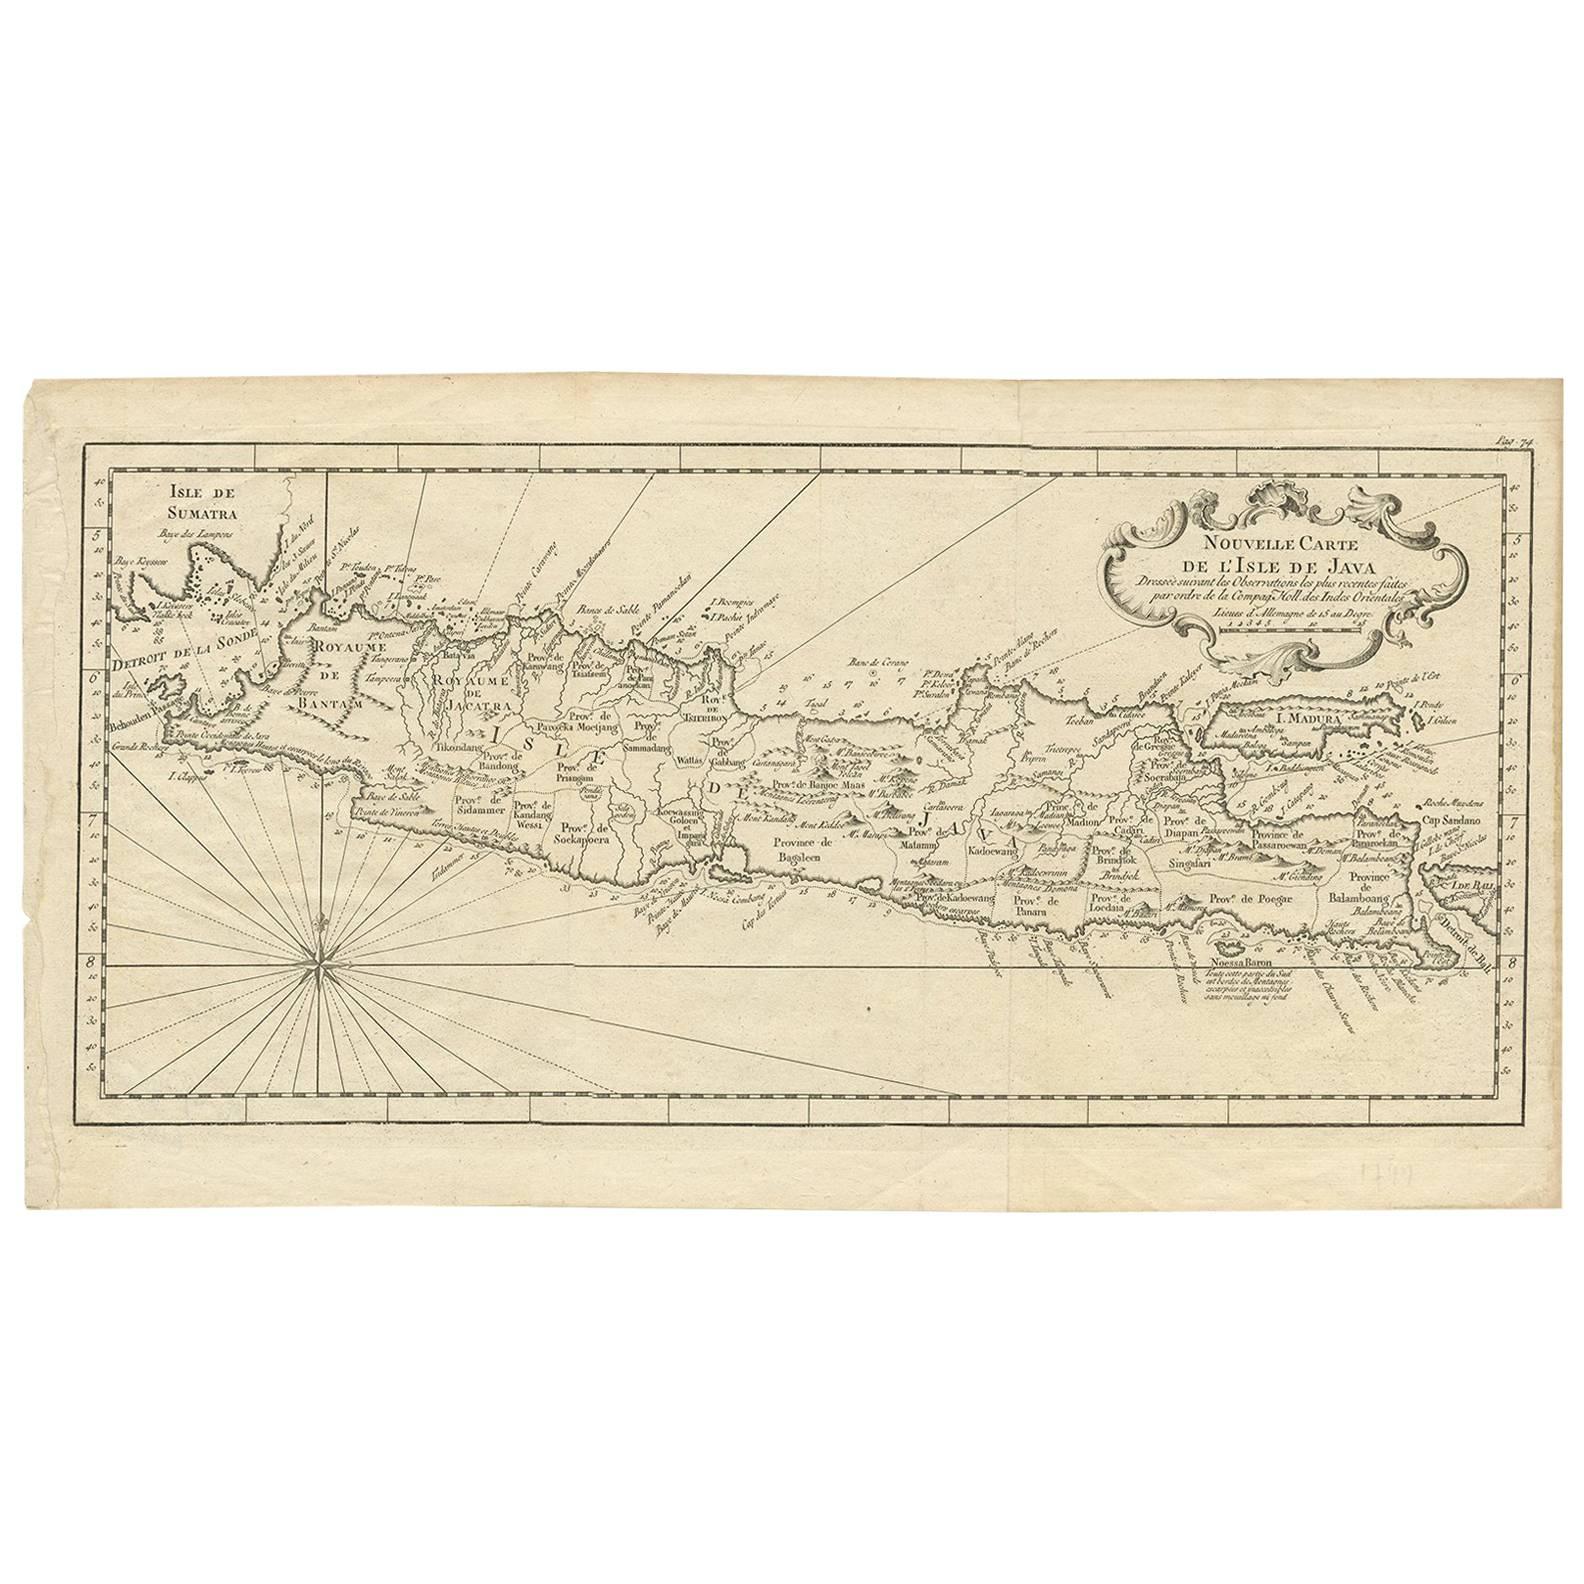 Antique Map of Java 'Indonesia' by Arkstee & Markus (1763)